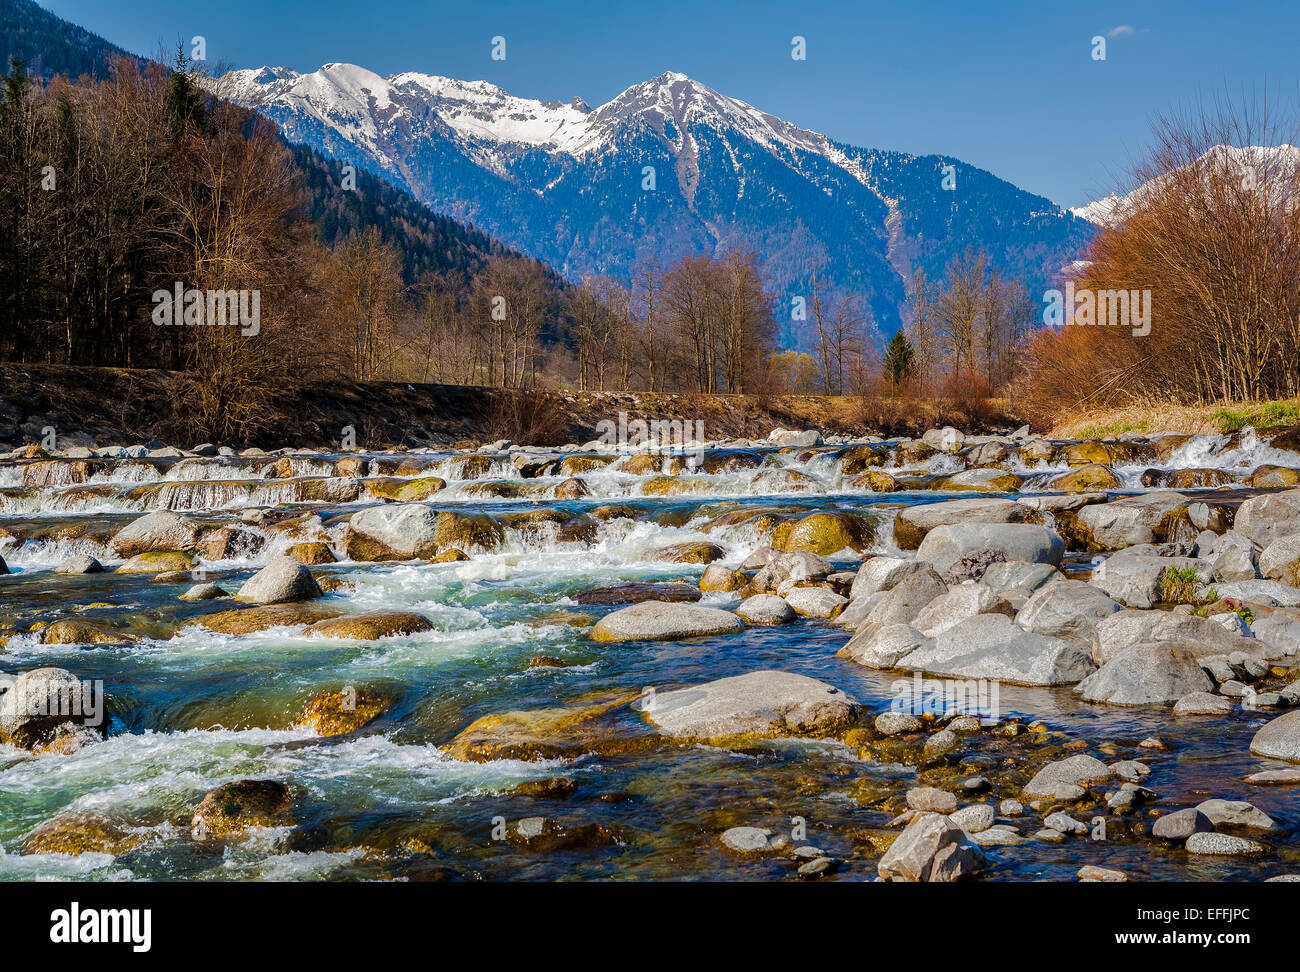 landscape with mountains trees and rocky river. Italy, Alps Stock Photo